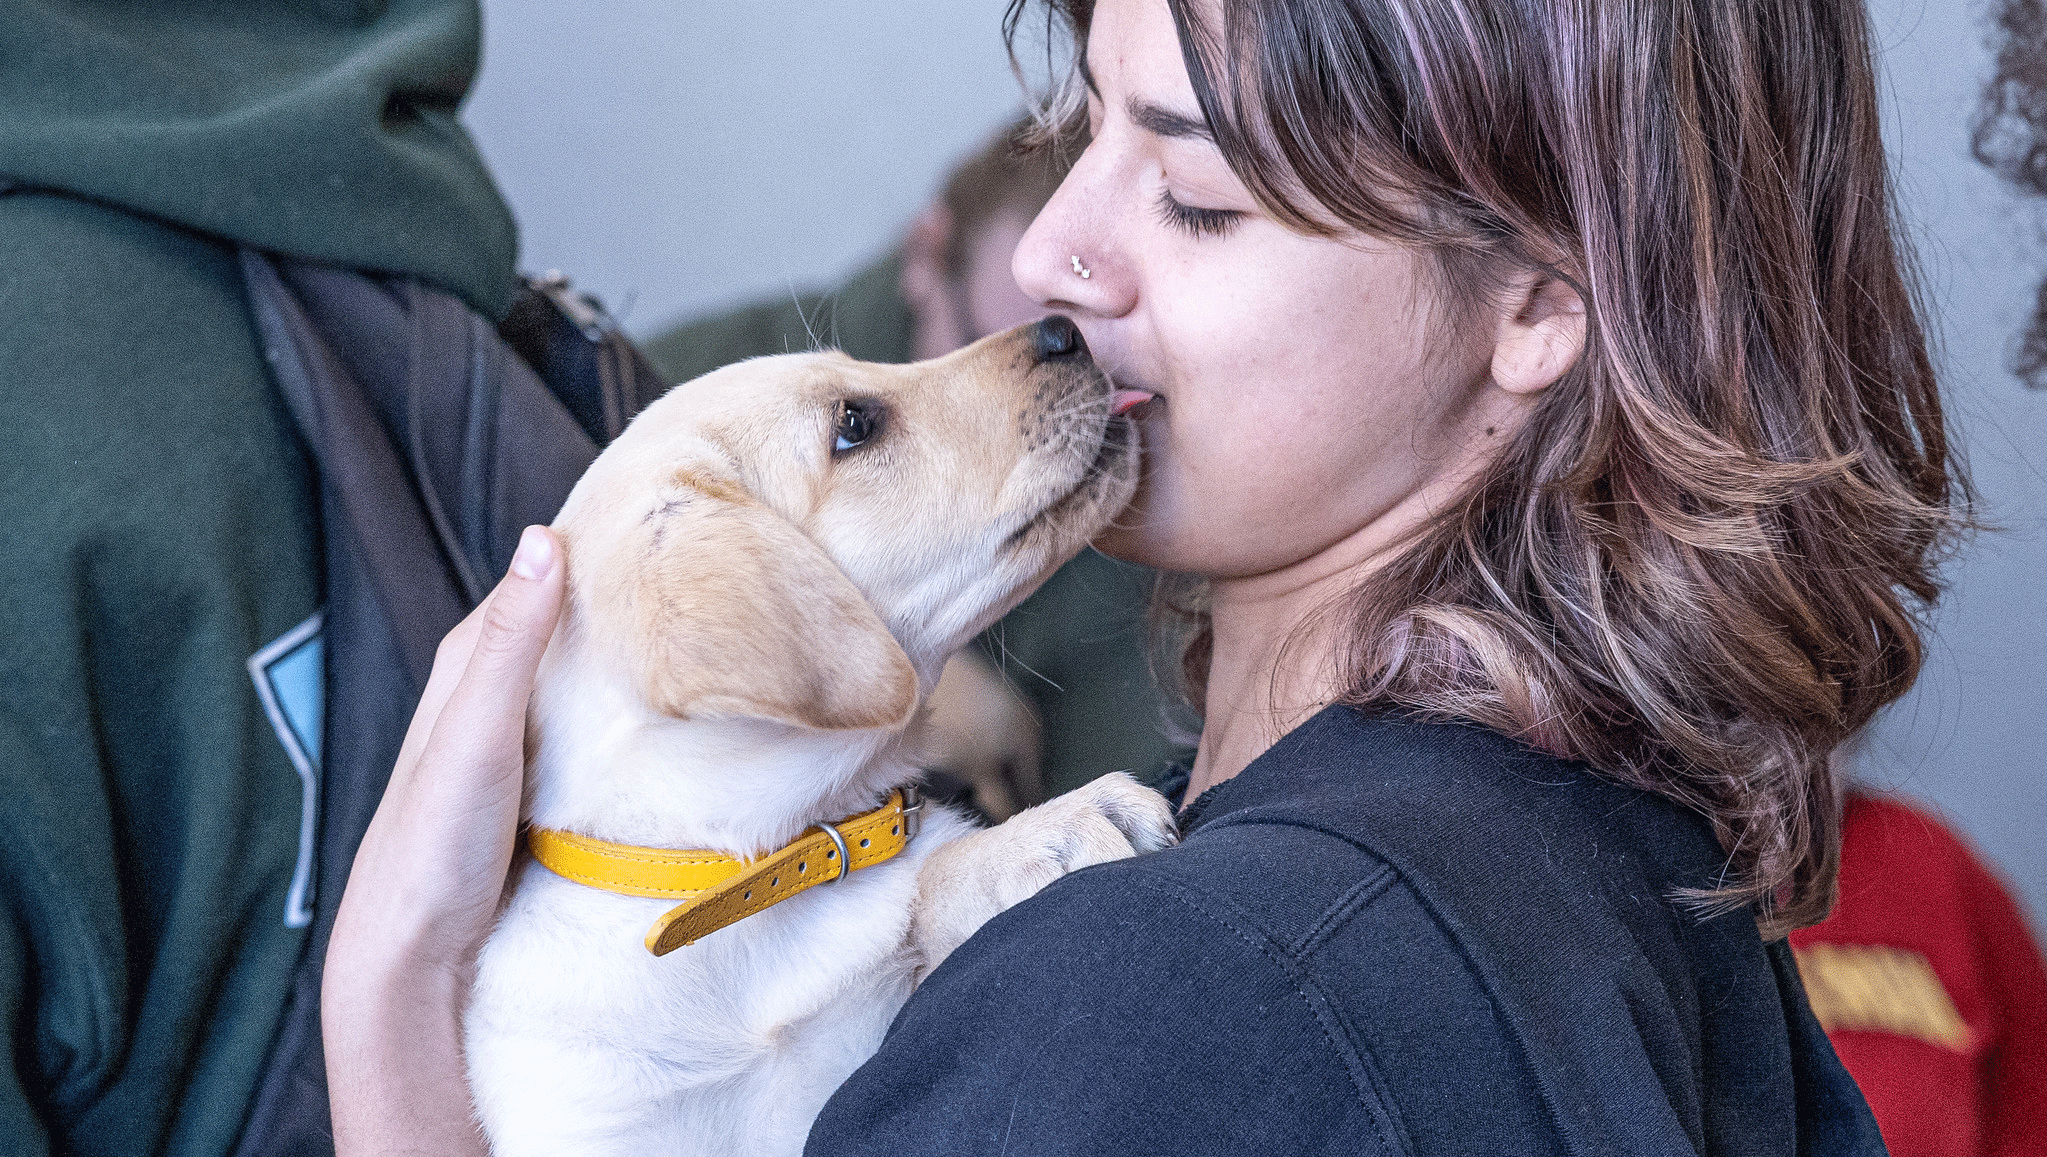 Student receives puppy kiss